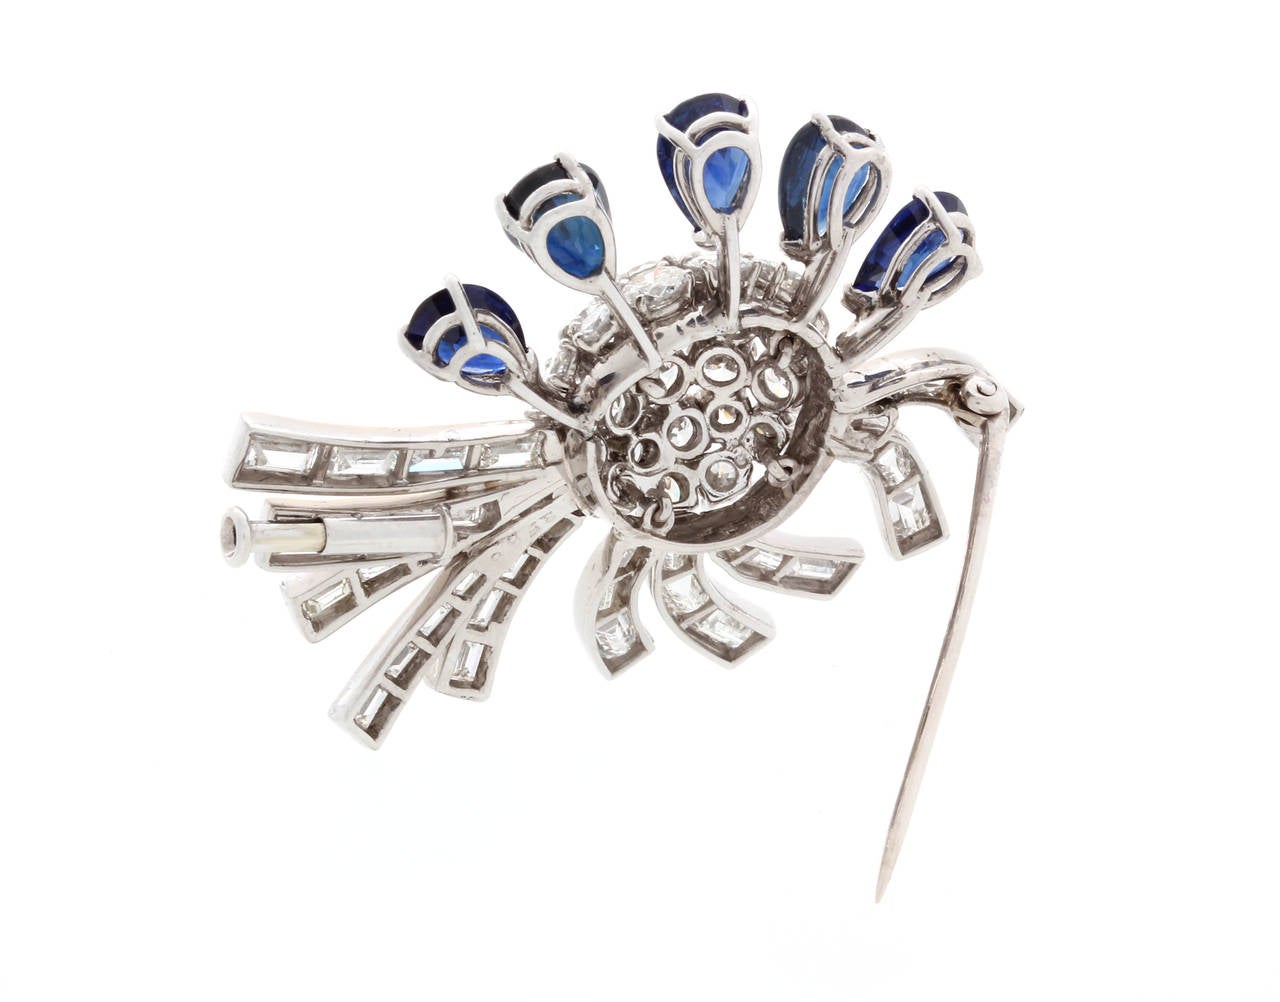 Art Deco platinum diamond and sapphire brooch. Brooch center in multiple round diamonds, surrounded by five tear drop blue sapphires on one side and ten baguette diamond ribbons on the other. Brooch Diamensions: Length 1.88